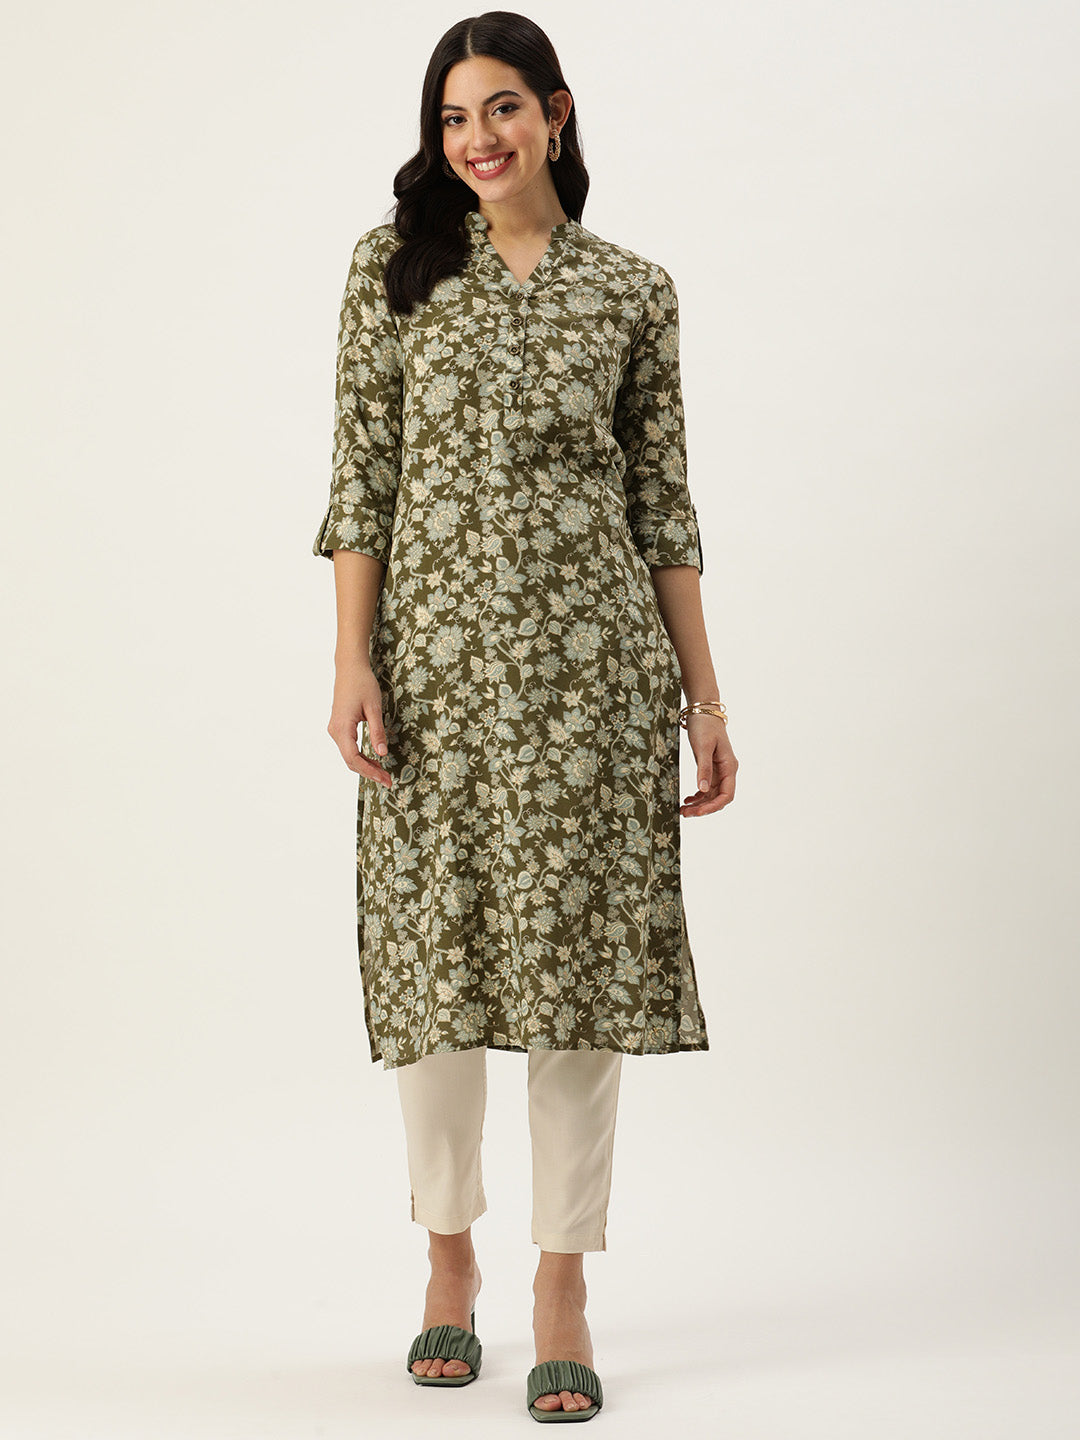 Olive Green Floral Printed Kurta with a pocket 